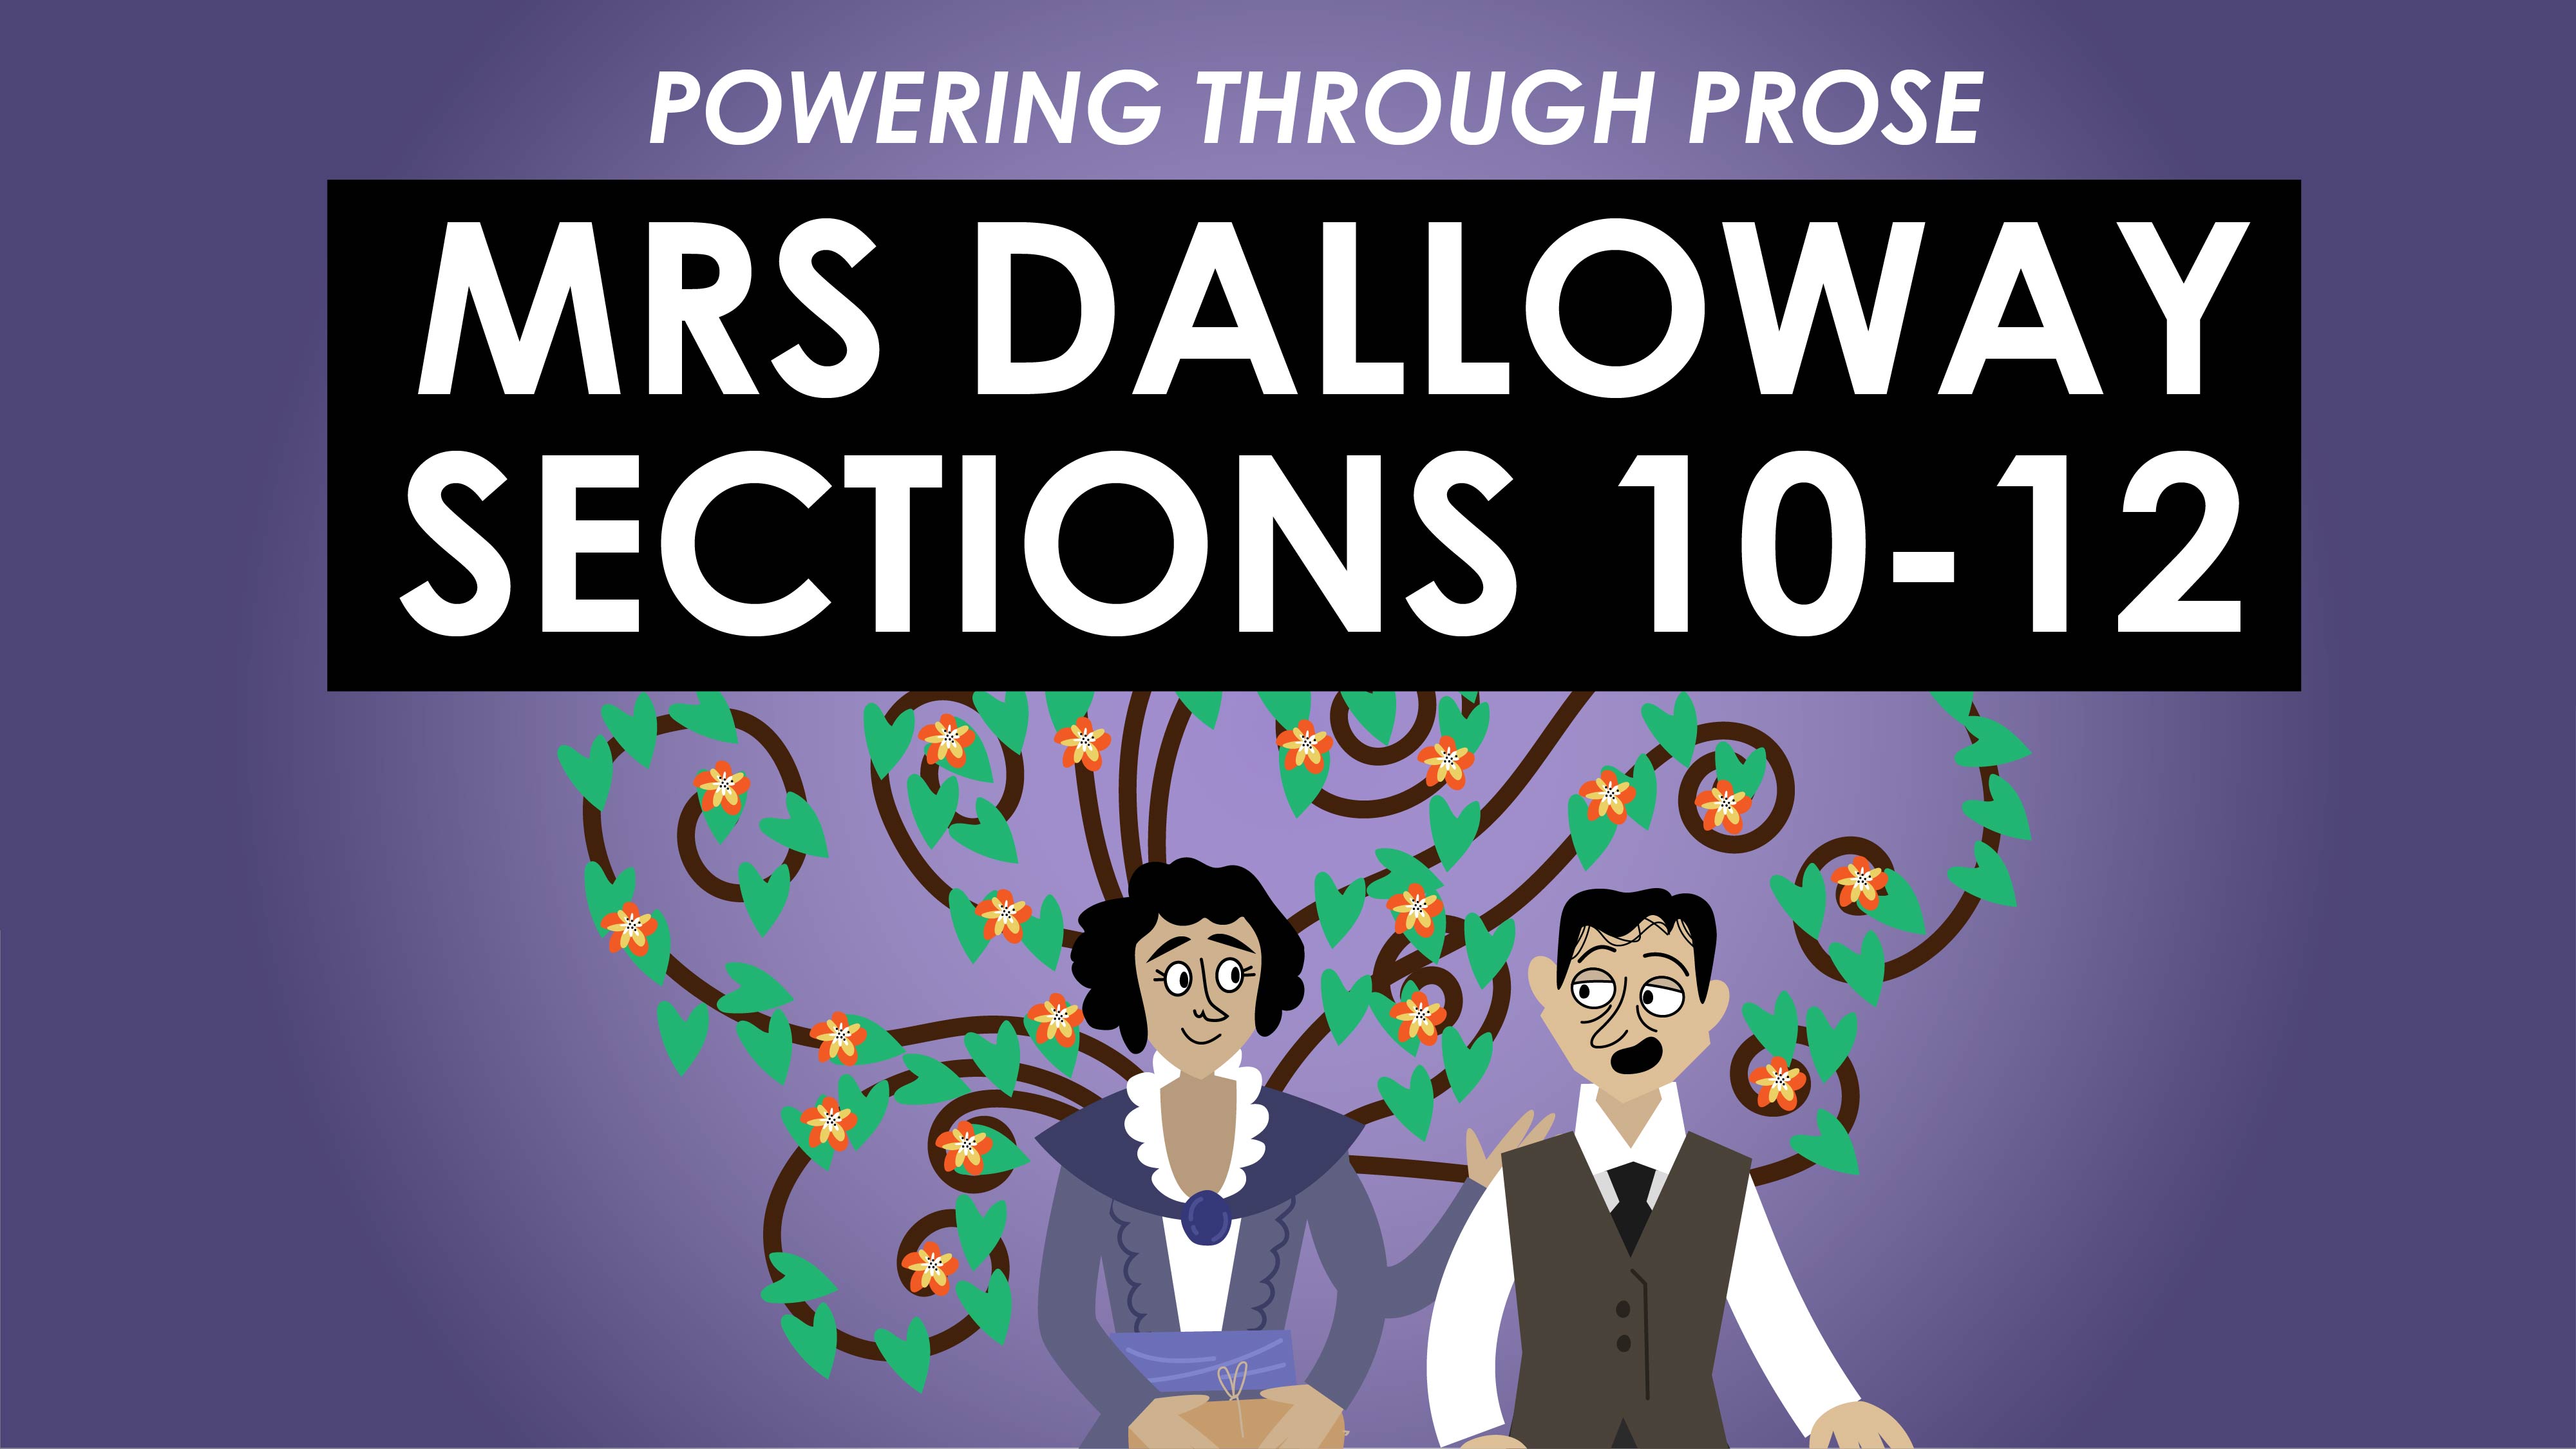 Mrs Dalloway - Virginia Woolf - Sections 10-12 - Powering Through Prose Series